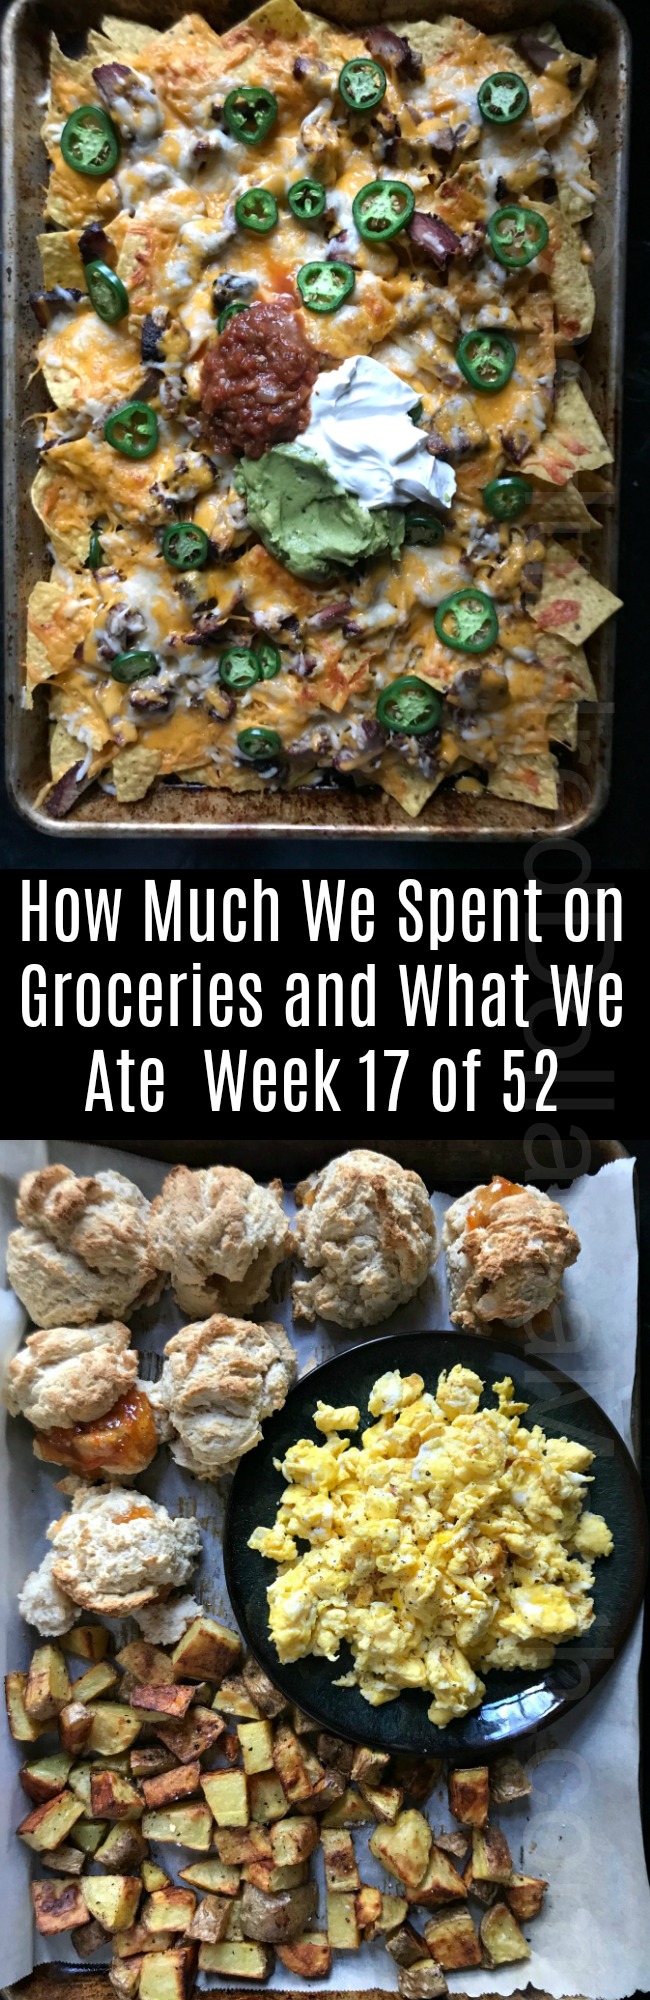 How Much We Spent on Groceries and What We Ate – Week 17 of 52